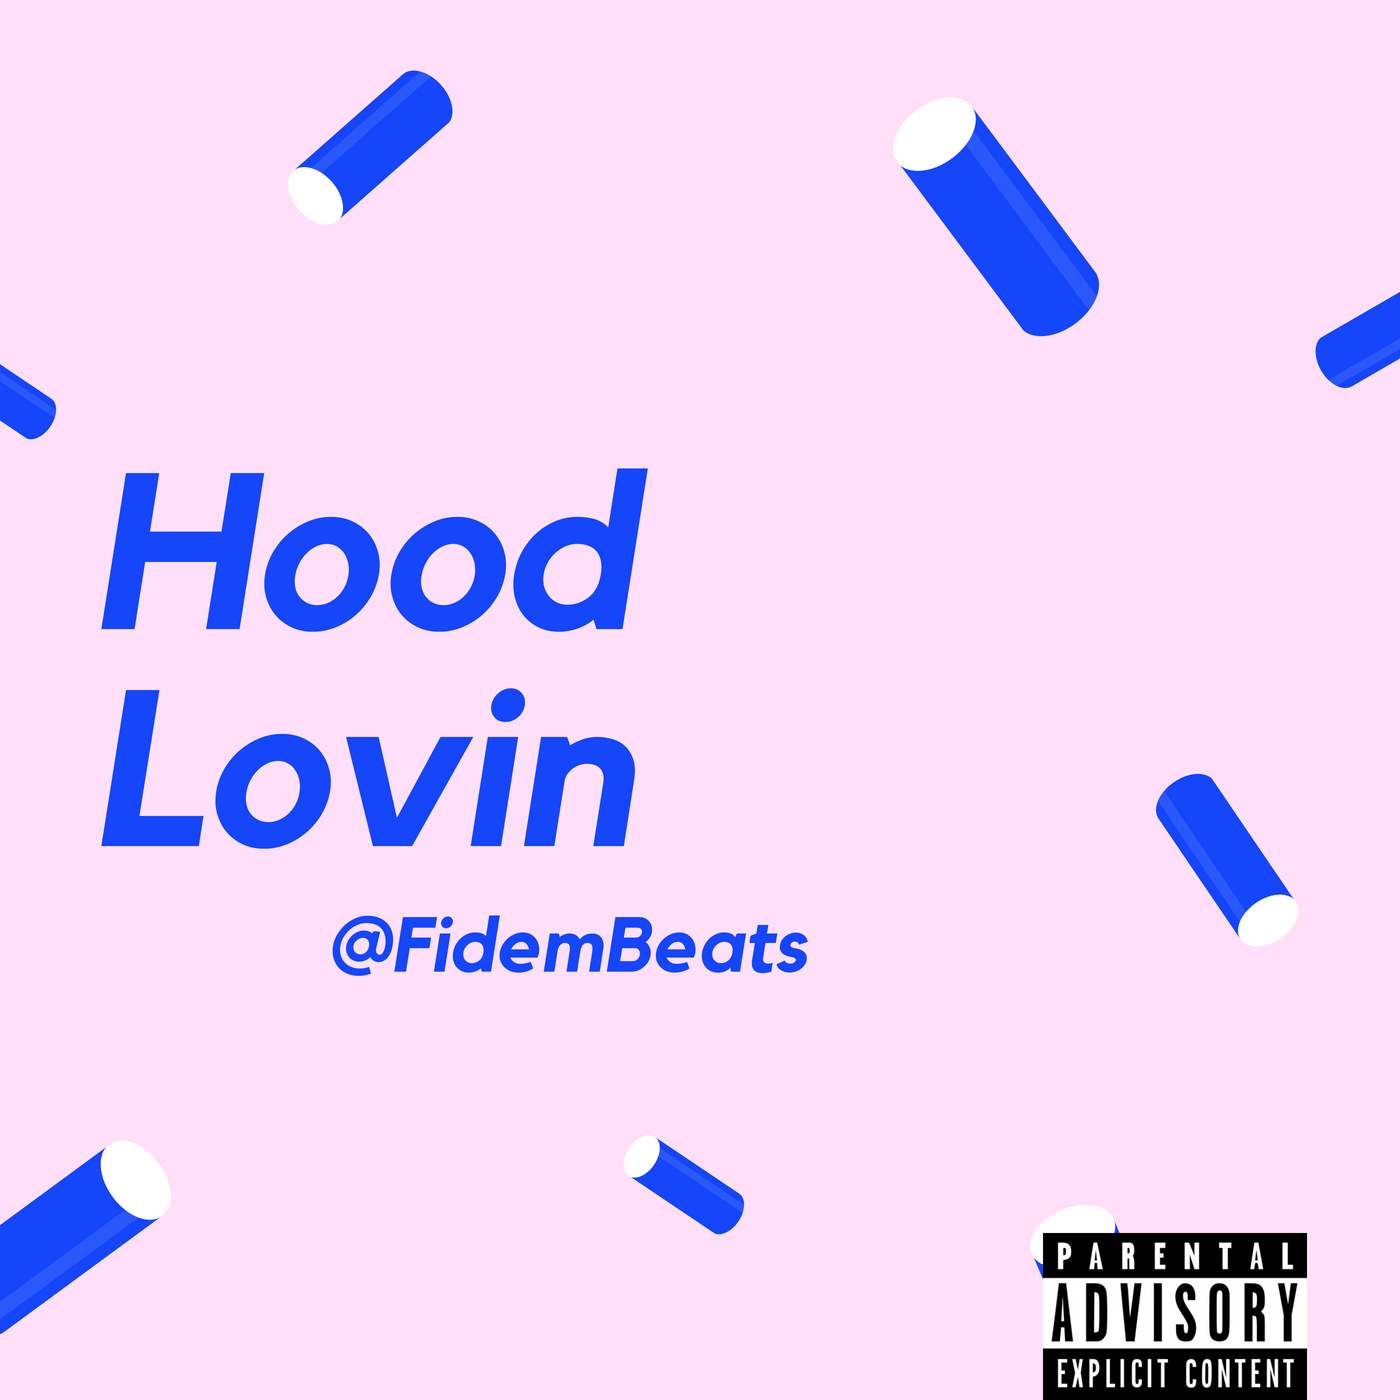 Fidem Beats Balances A Raunchy Love Life With His Booming Music Career In His Smooth New Banger Called “Hood Lovin.” (Review & Stream)